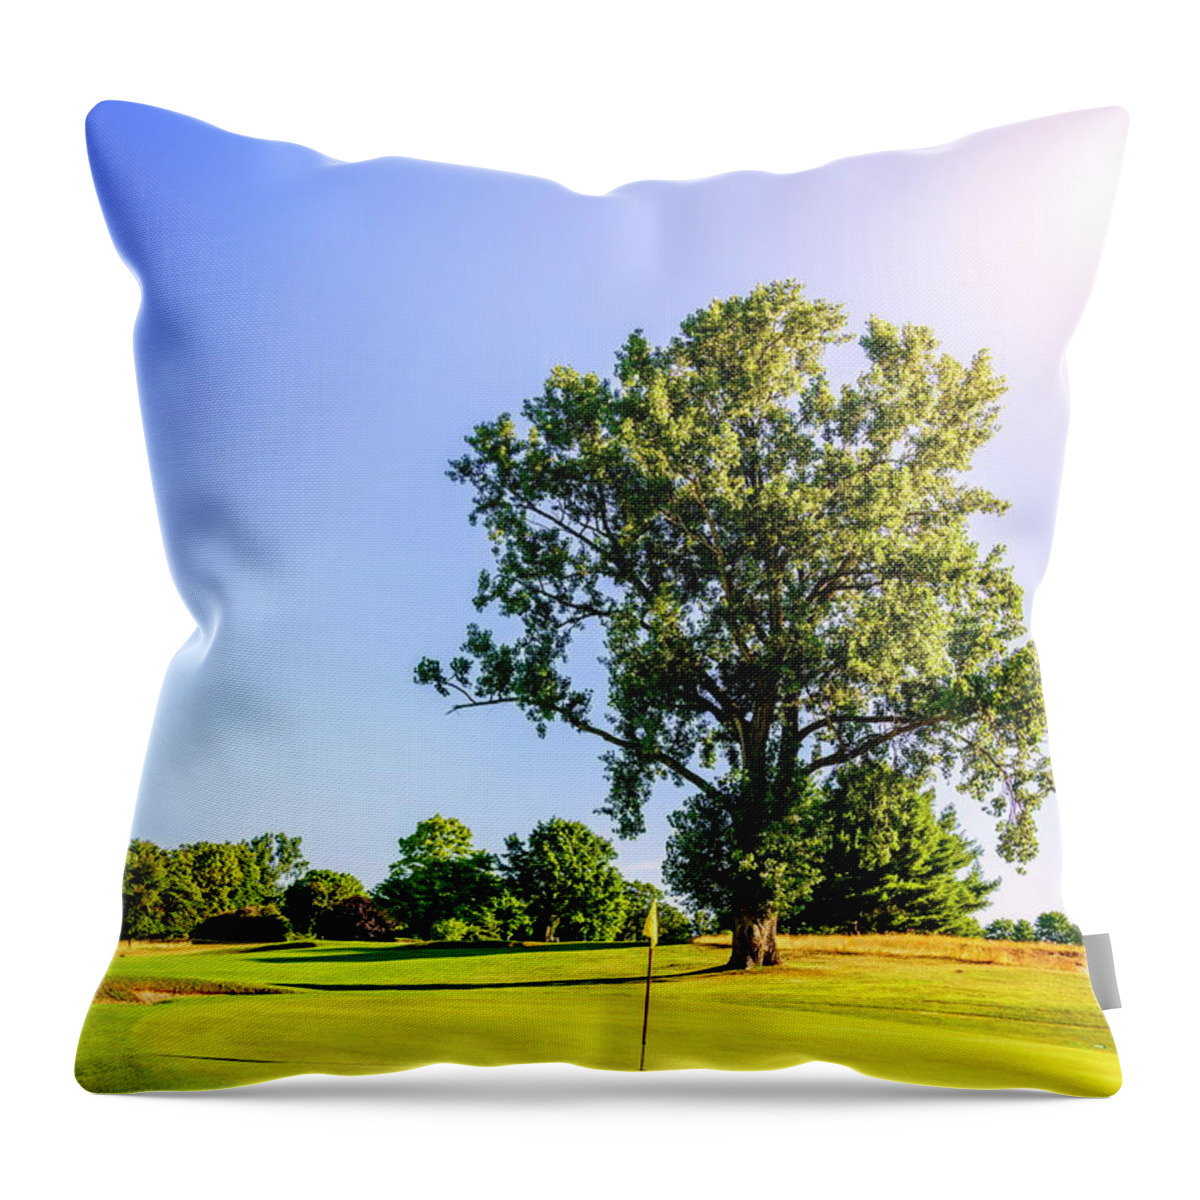 America Throw Pillow featuring the photograph Golf course by Alexey Stiop